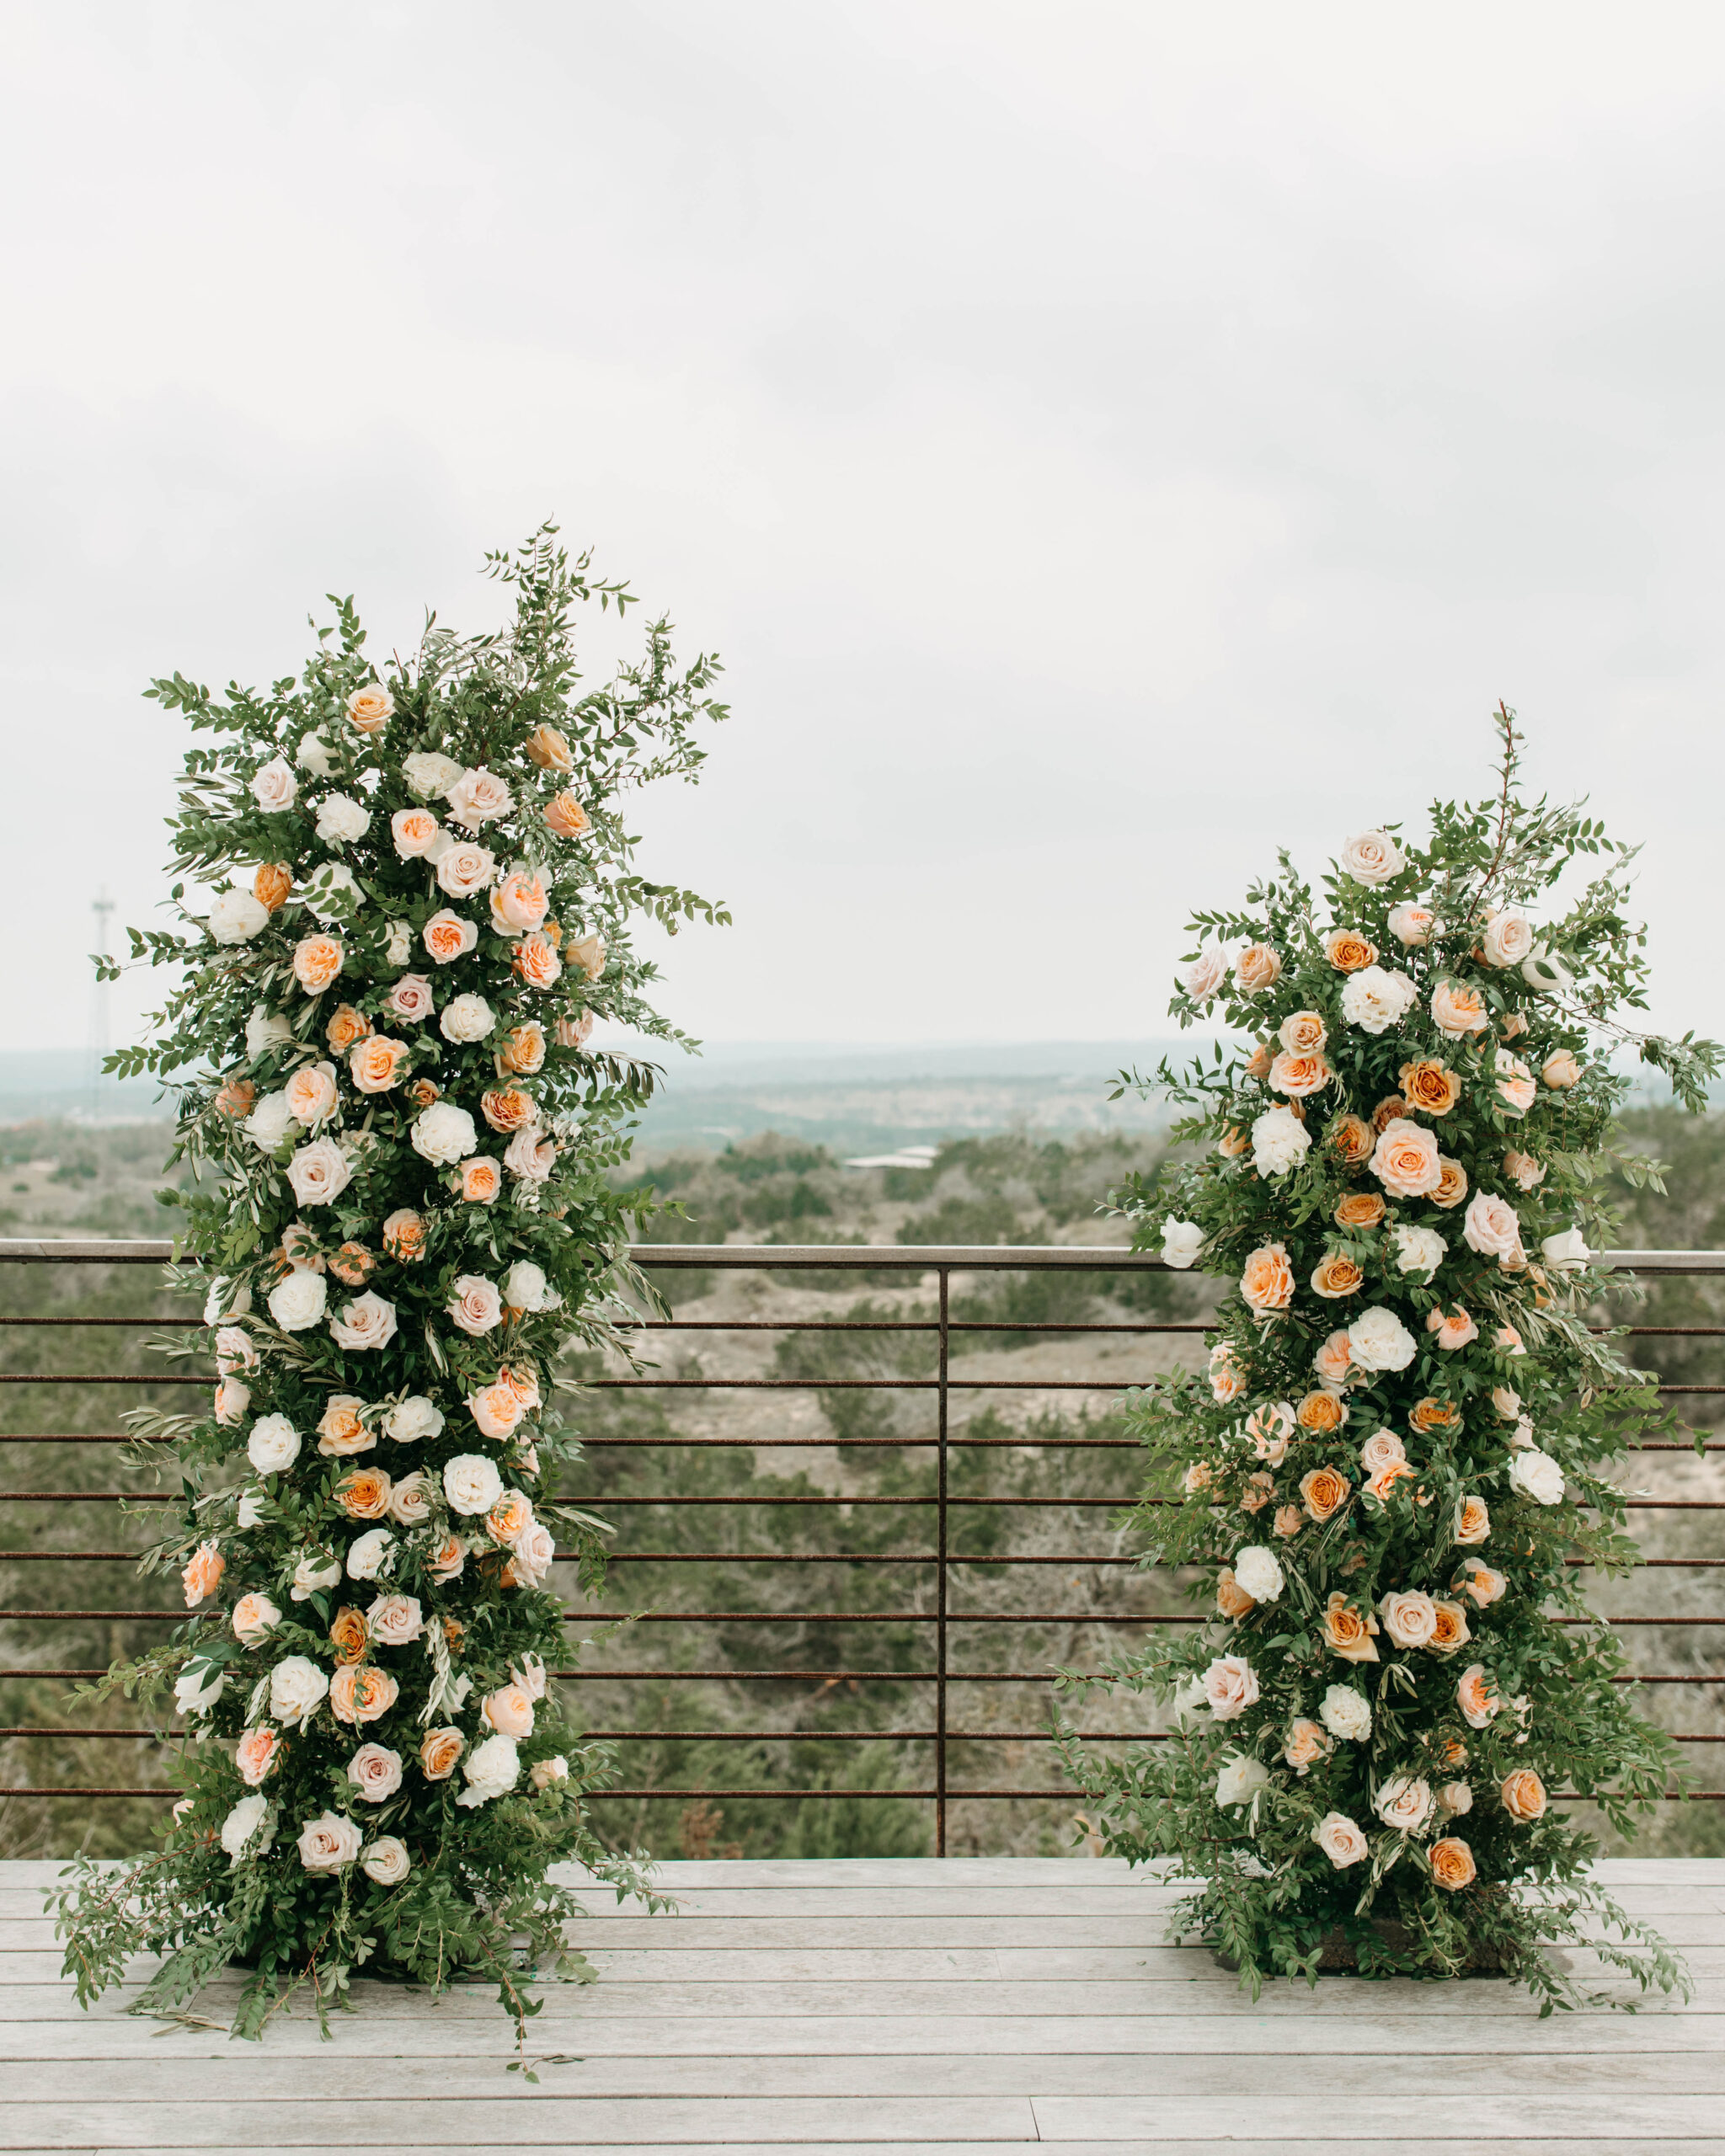 Floral Arches for a wedding ceremony 